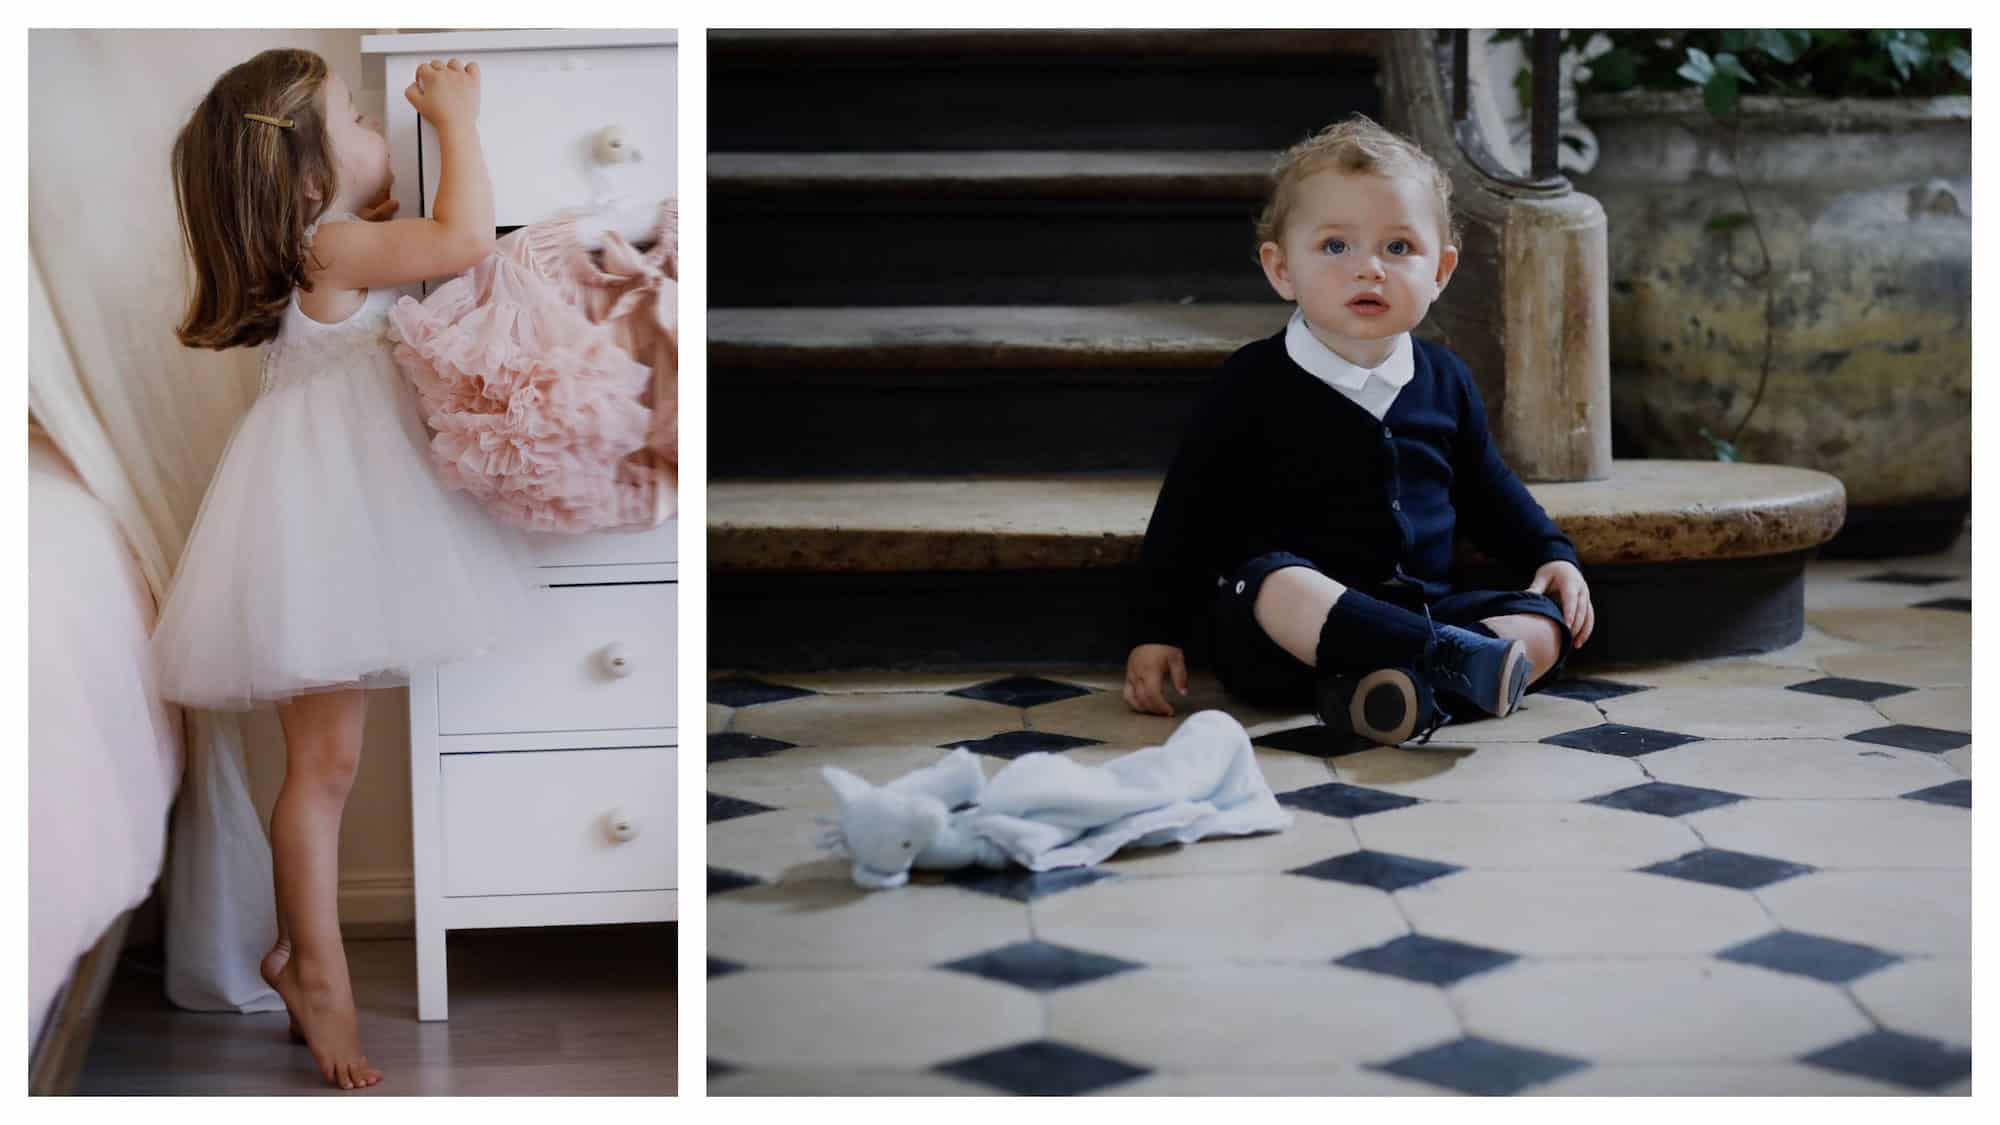 A little girl wearing a tutu and standing on tiptoe while peeping inside a drawer (left). A toddler wearing a chic navy cardigan and matching boots, sitting on tiled floors by a wooden Parisian staircase (right).